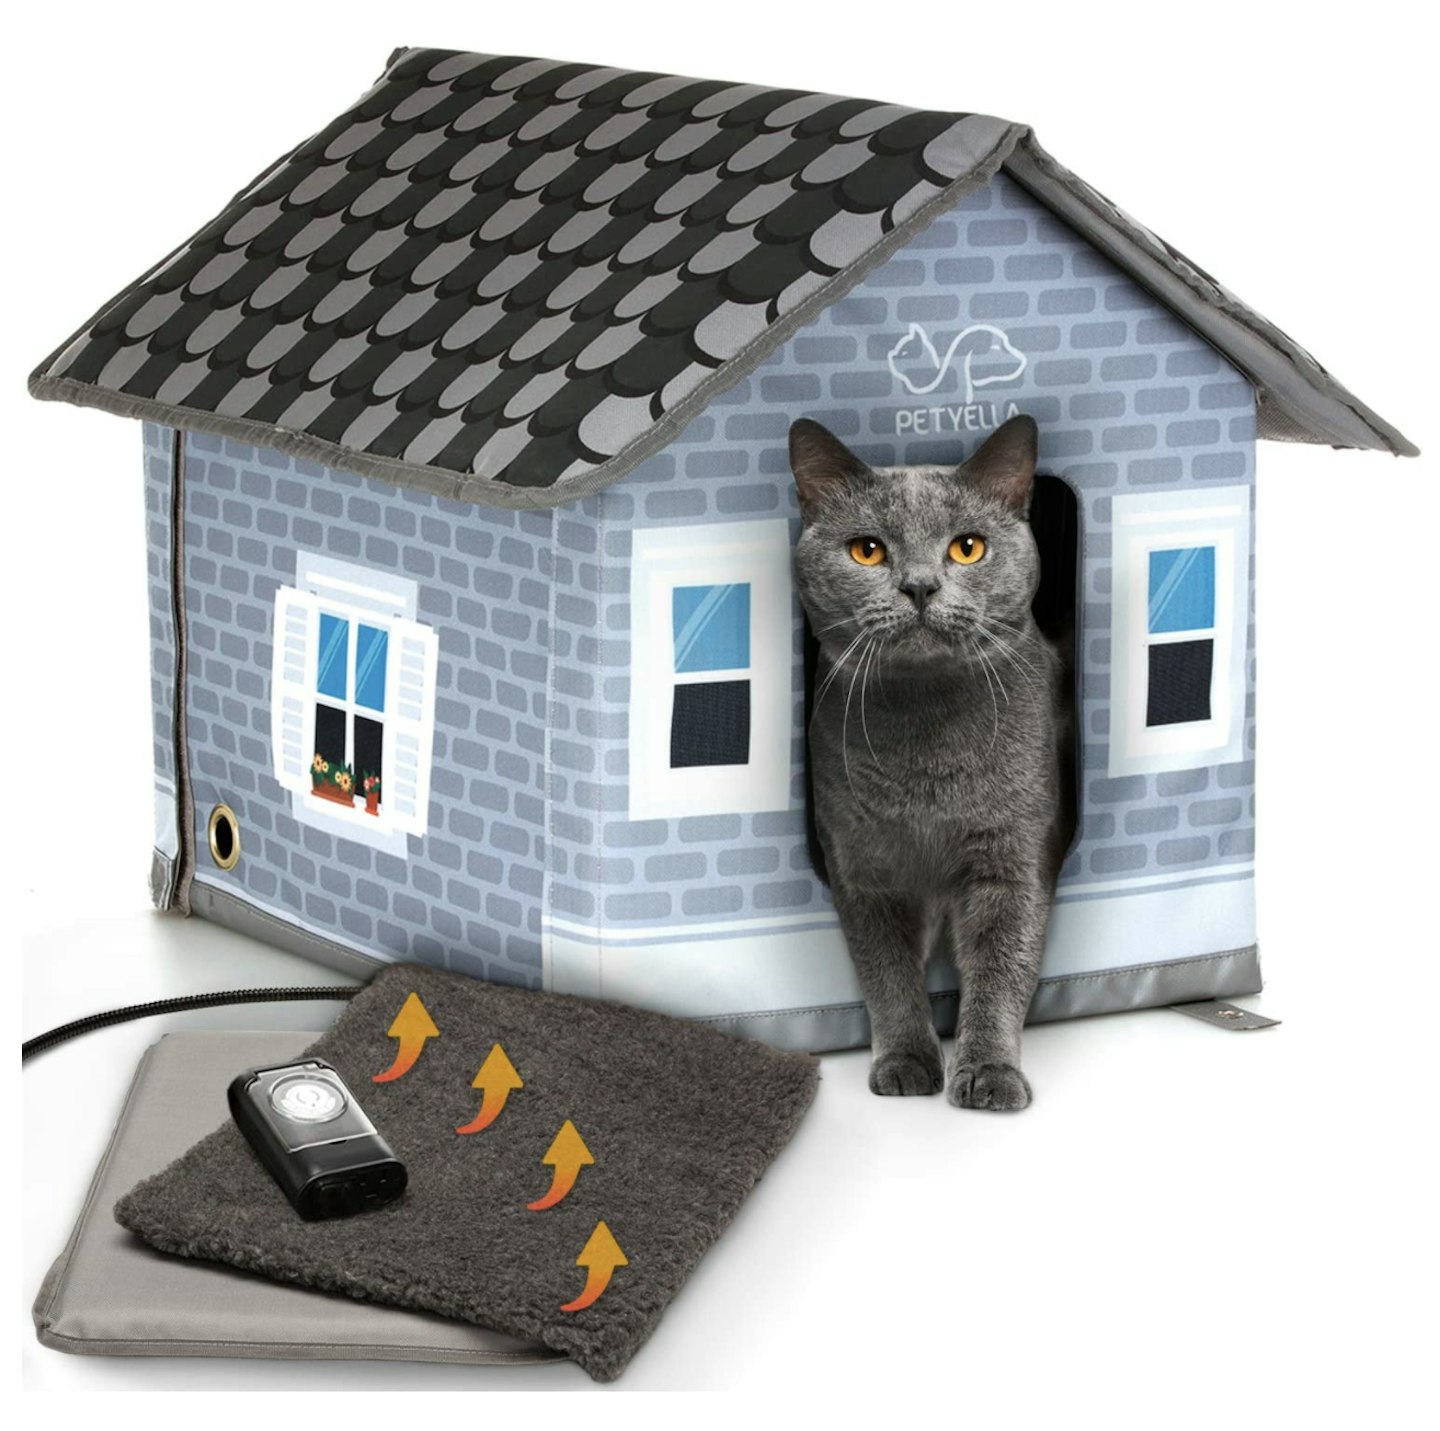 PETYELLA Heated Cat Houses for Outdoor Cats